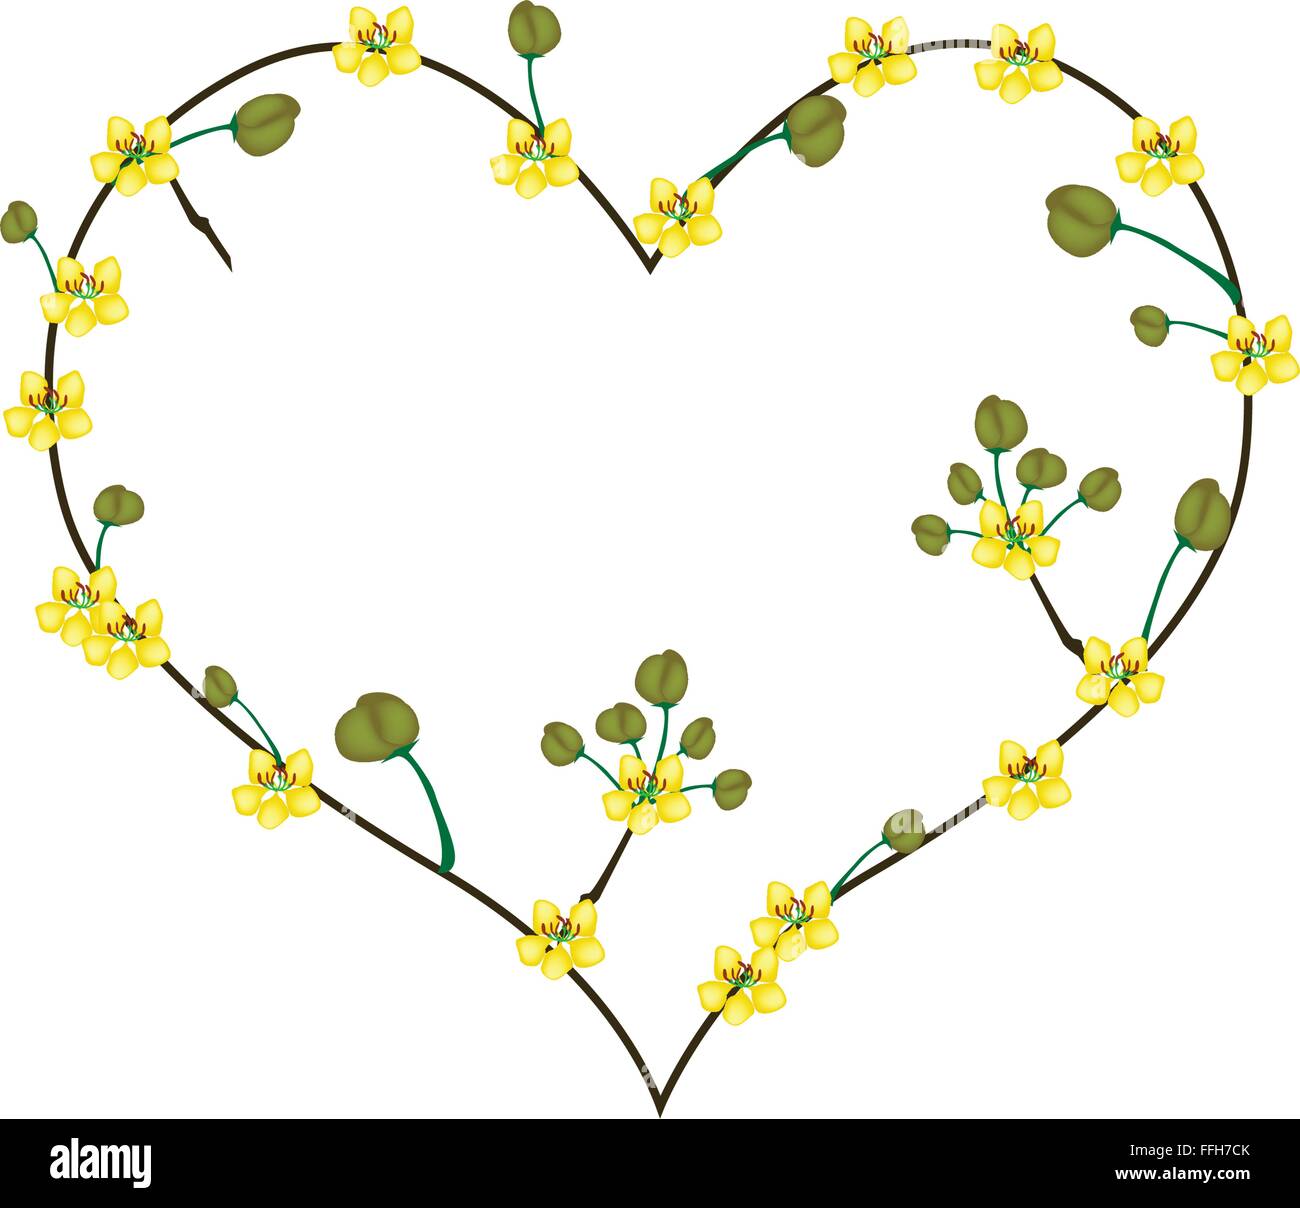 Love Concept, Illustration of Yellow Cassod Flowers Forming in Heart Shape Isolated on White Background. Stock Vector